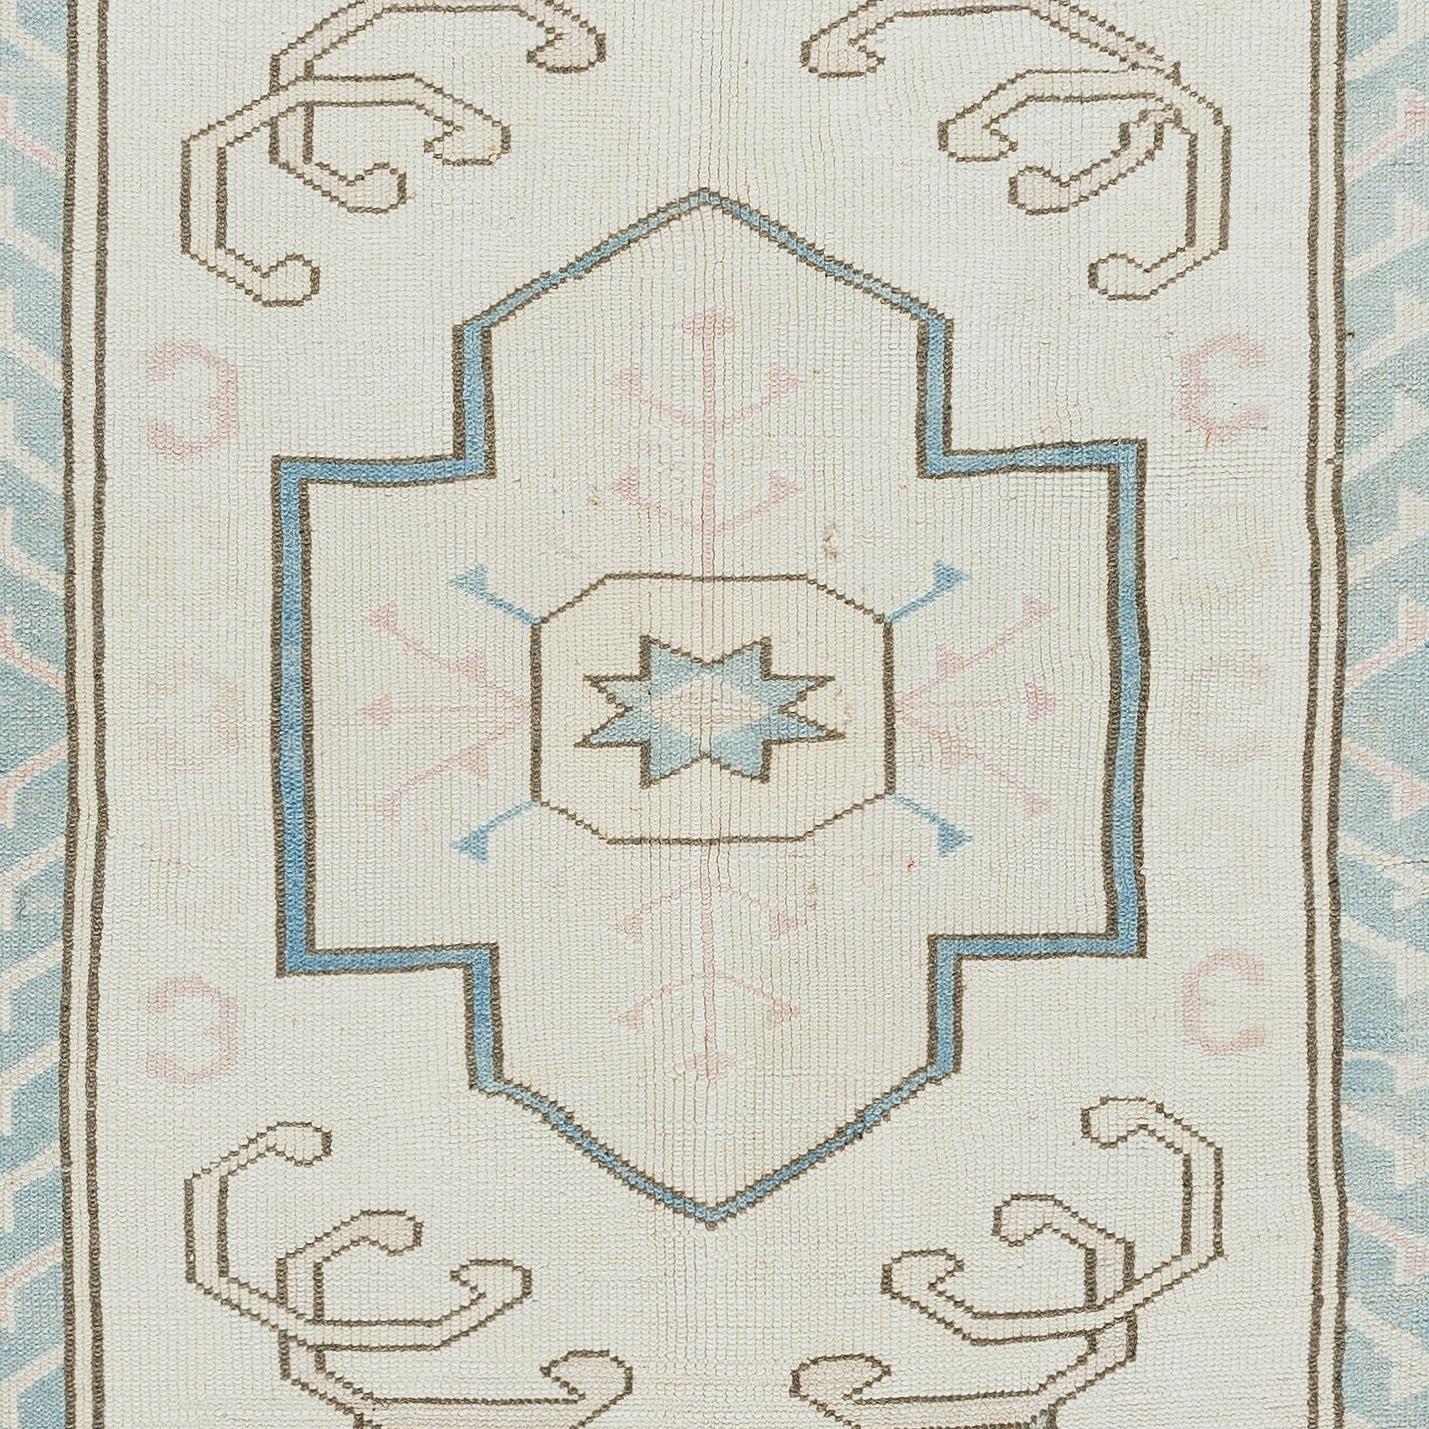 5x6.6 Ft Vintage Handmade Turkish Geometric Wool Area Rug in Light Blue & Cream In Good Condition For Sale In Philadelphia, PA